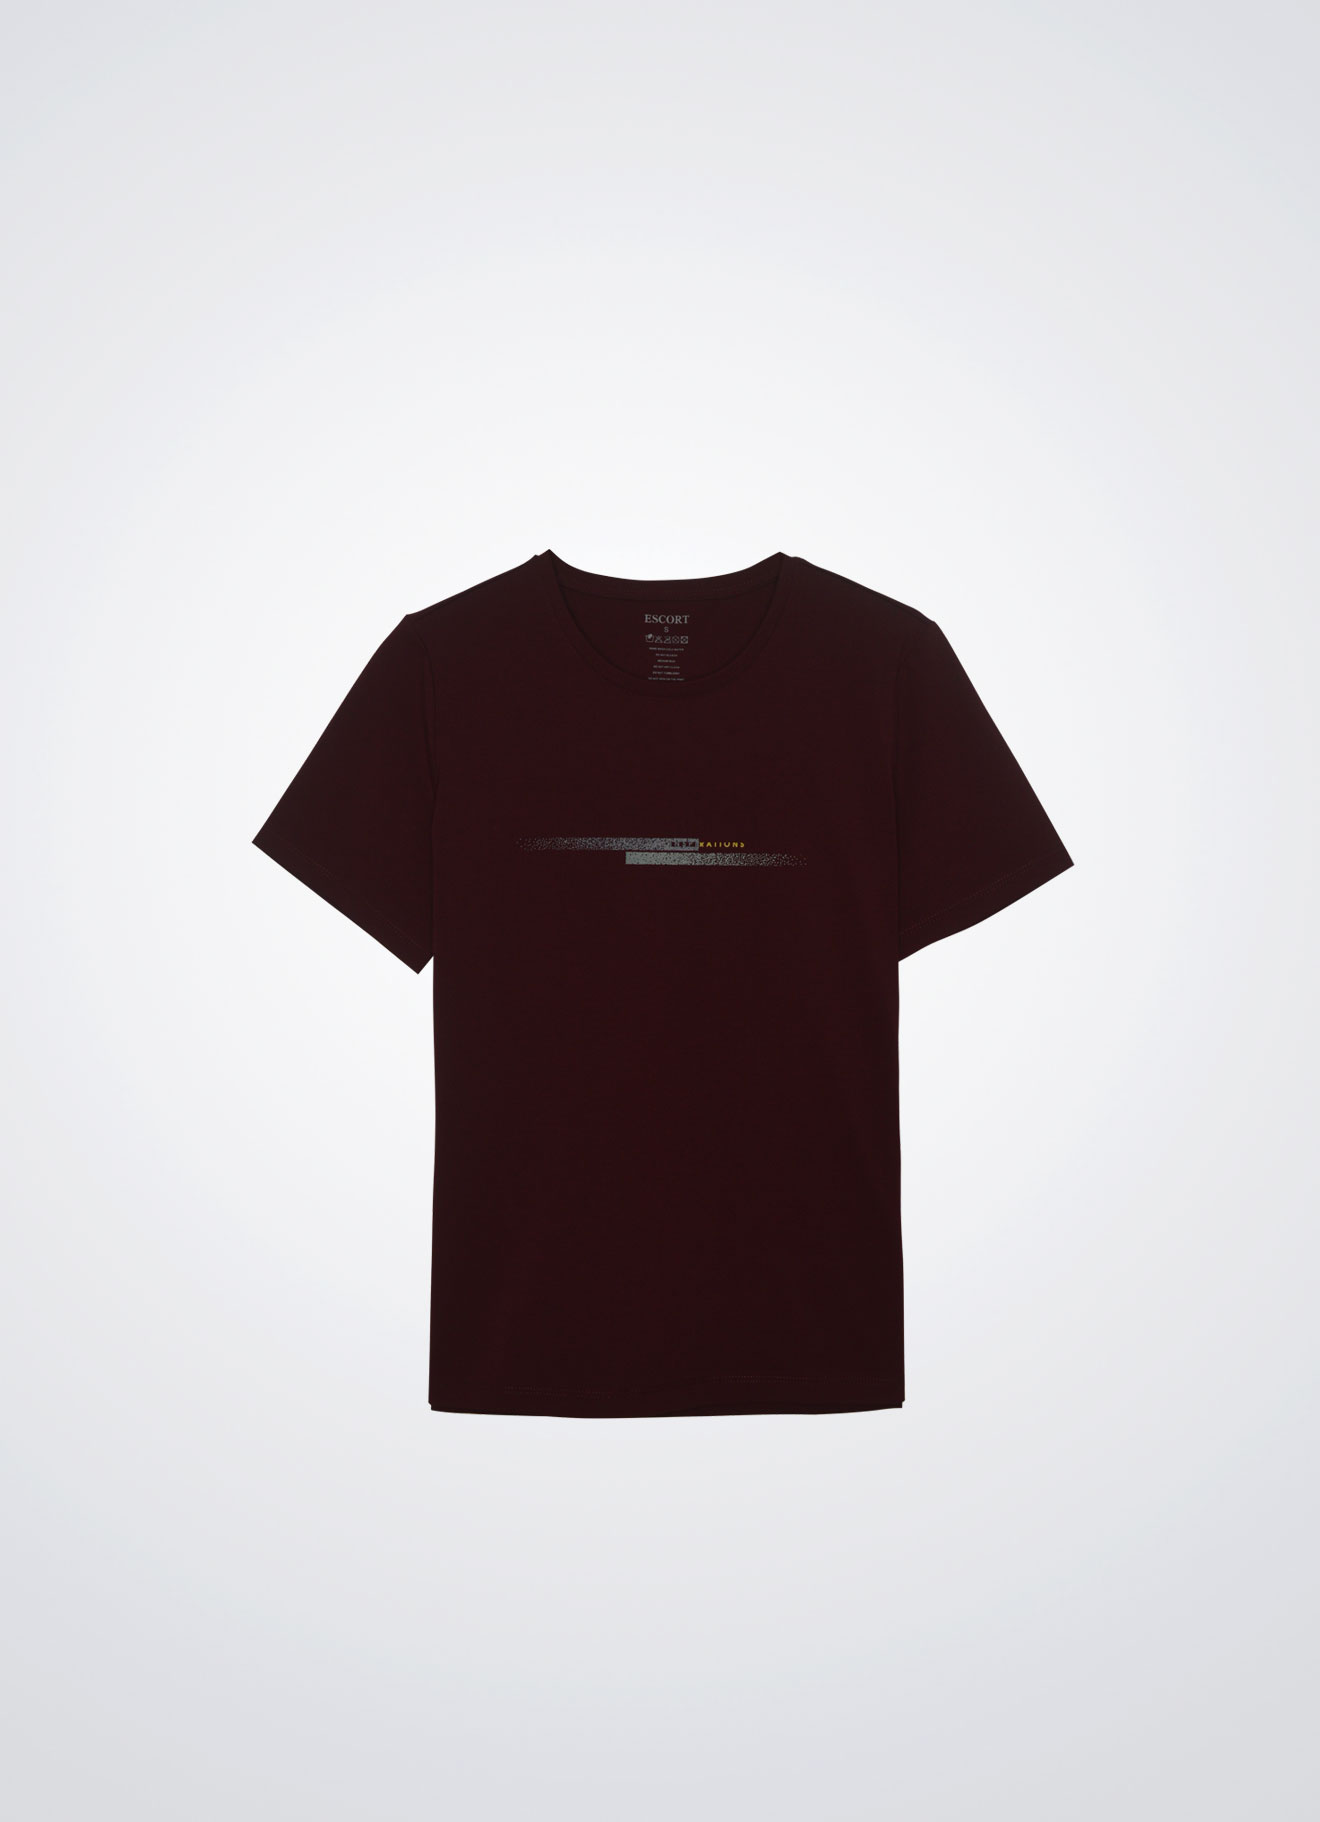 Cordovan by Couple T-Shirt